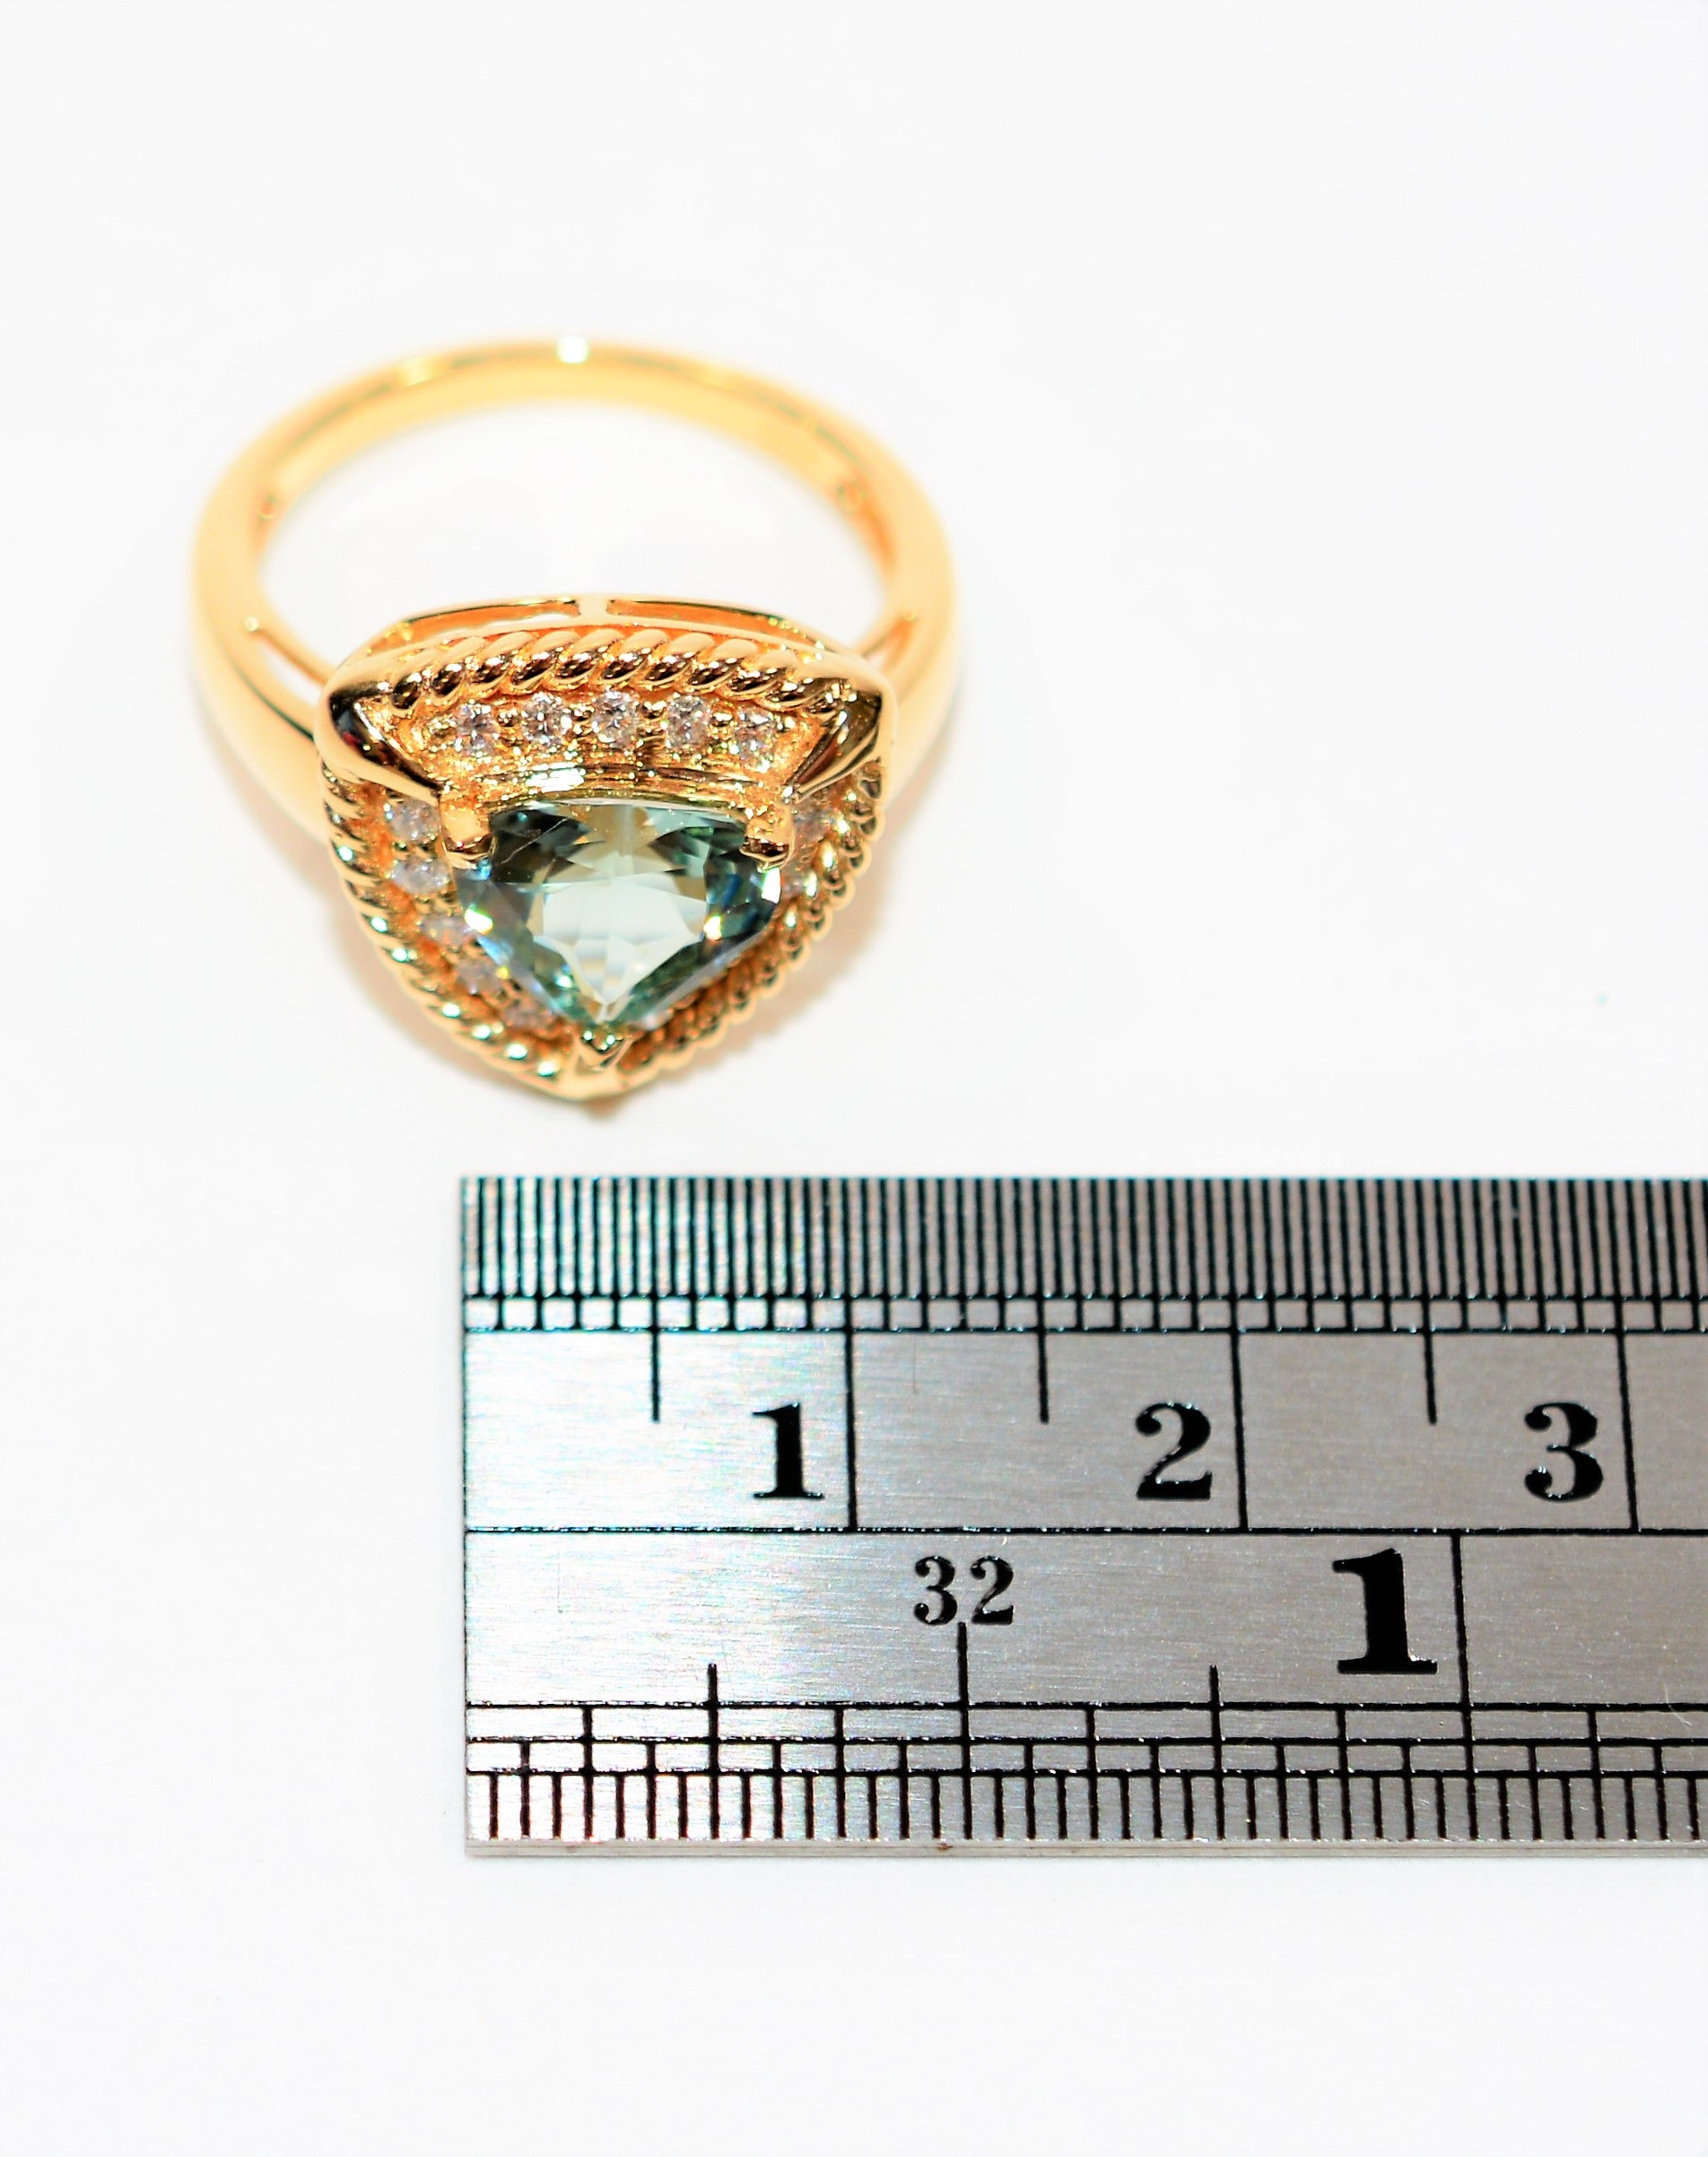 Natural Paraiba Tourmaline & Diamond Ring 14K Solid Gold 1.65tcw Heart Gemstone Women's Ring Statement Ring Cocktail Ring Fine Jewelry Love